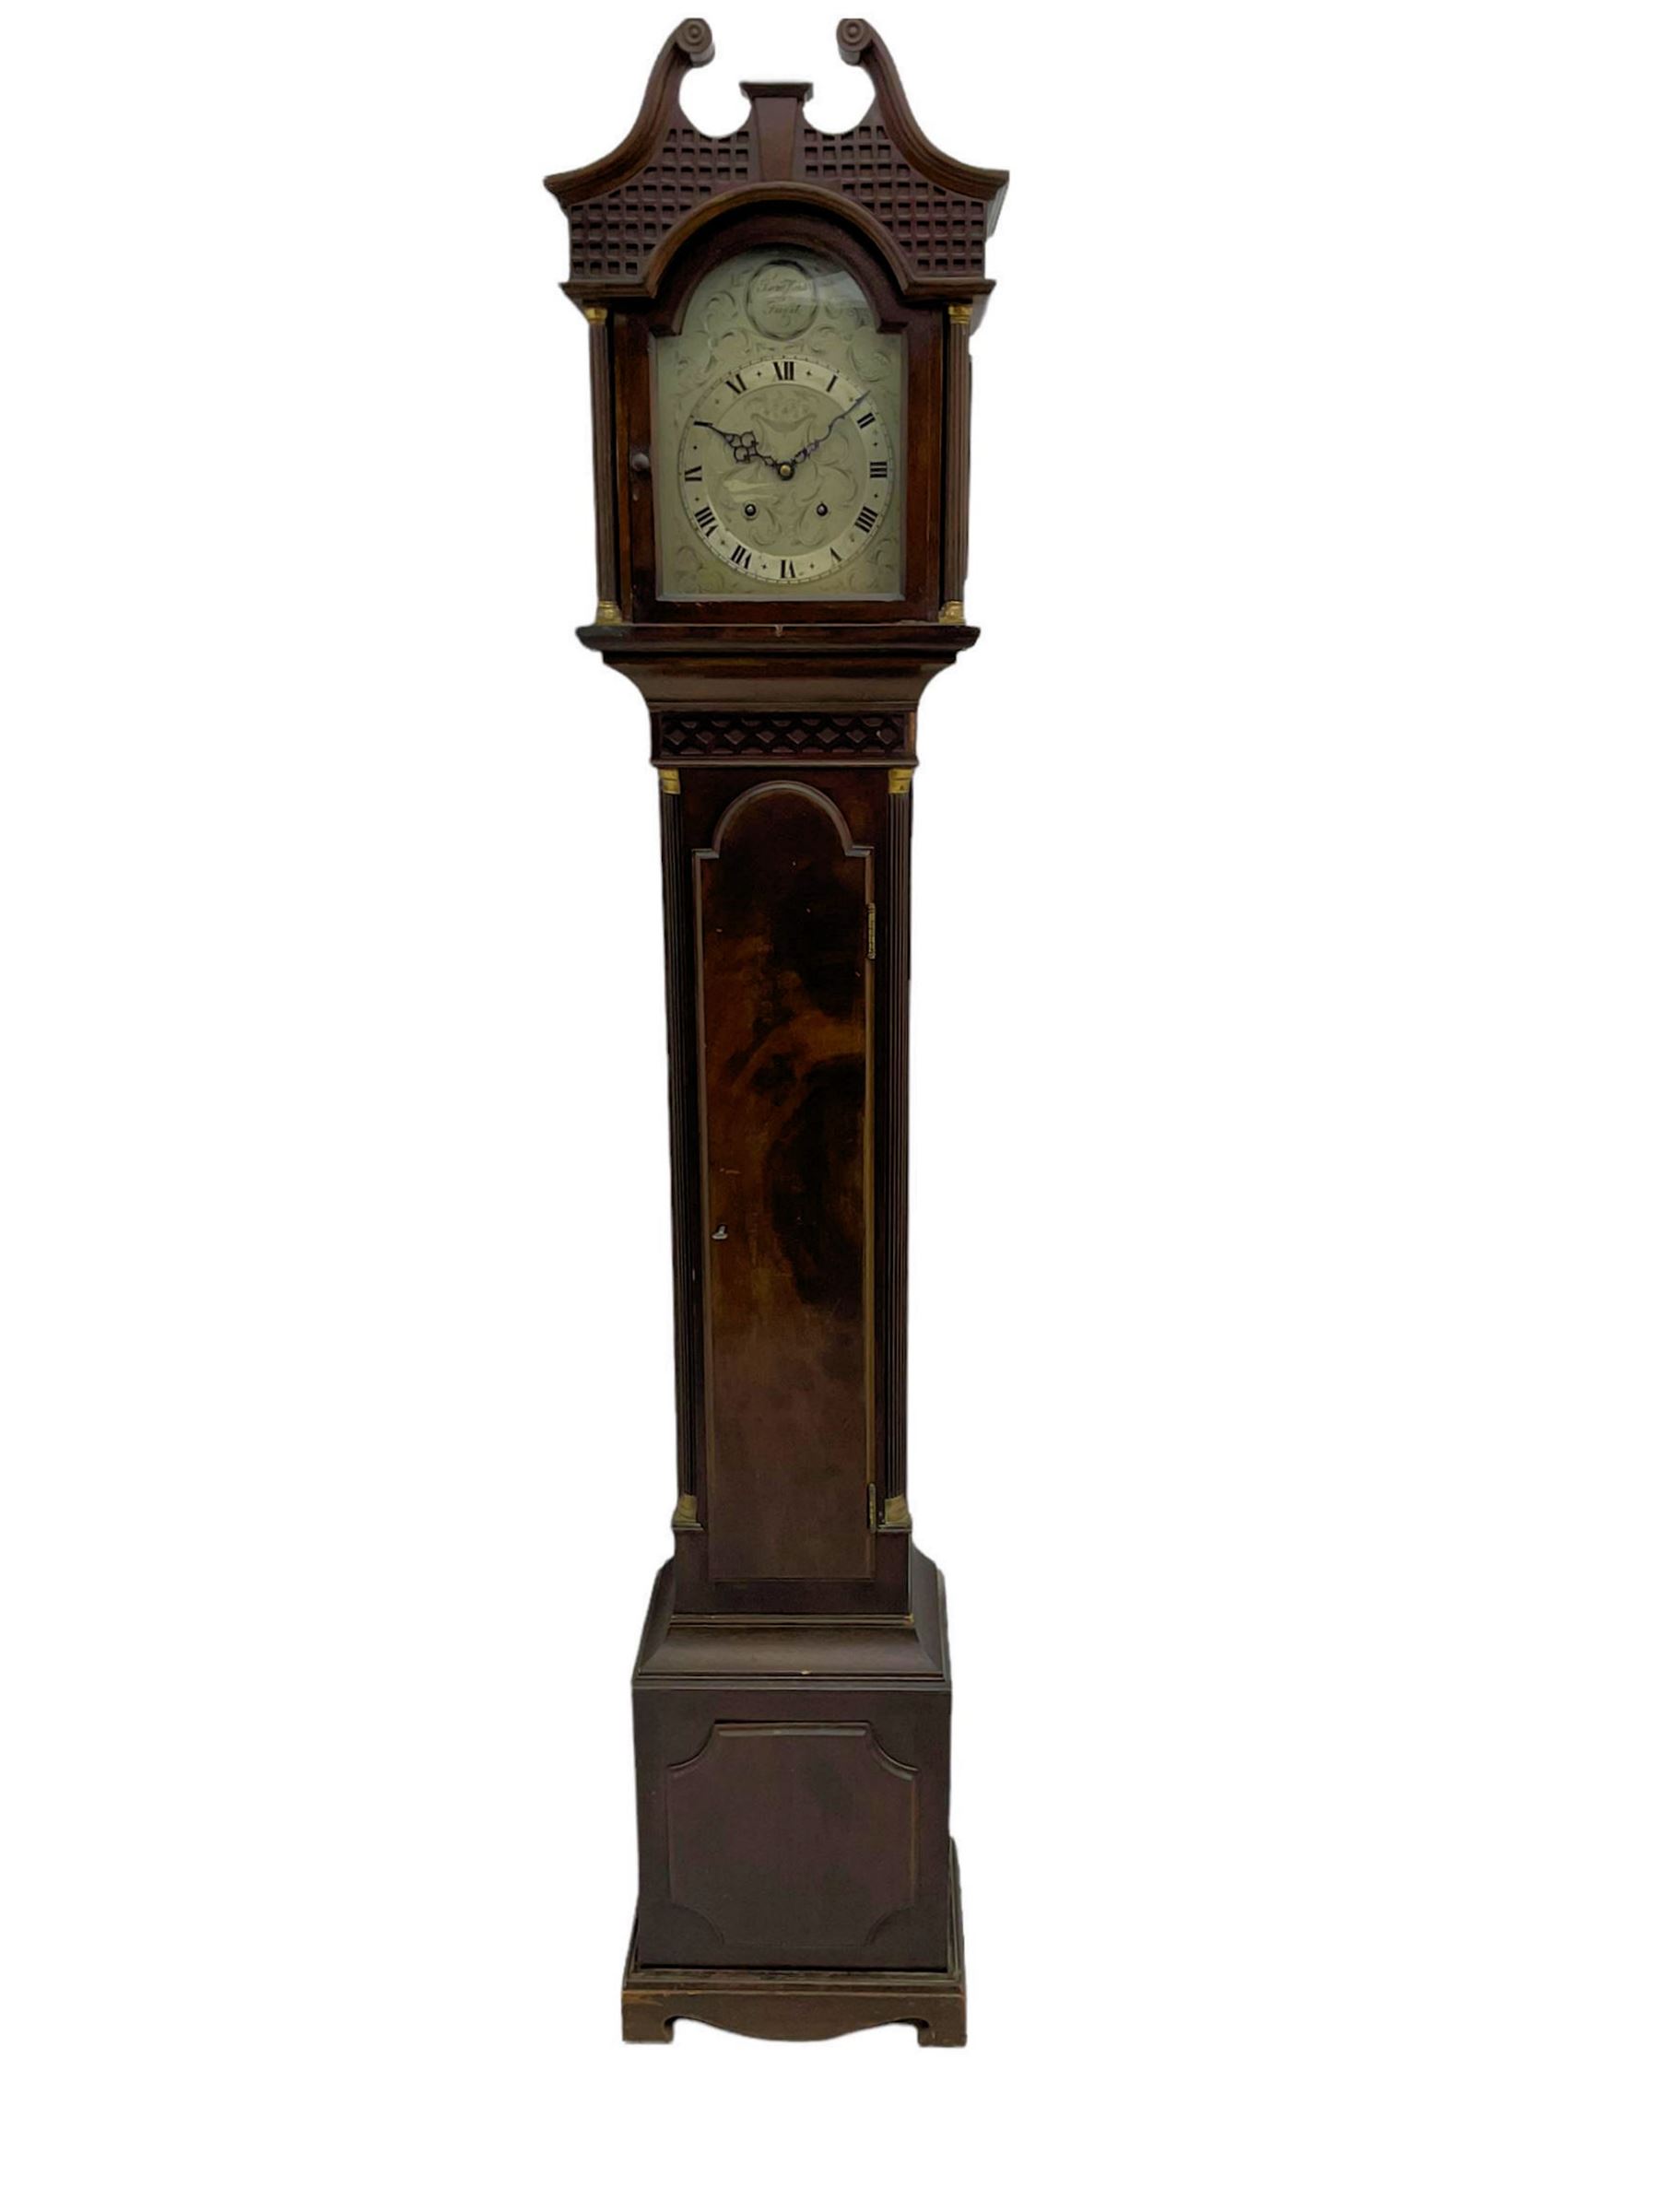 A compact mid-20th century �Grandmother� clock in a replica Georgian styled case c1950